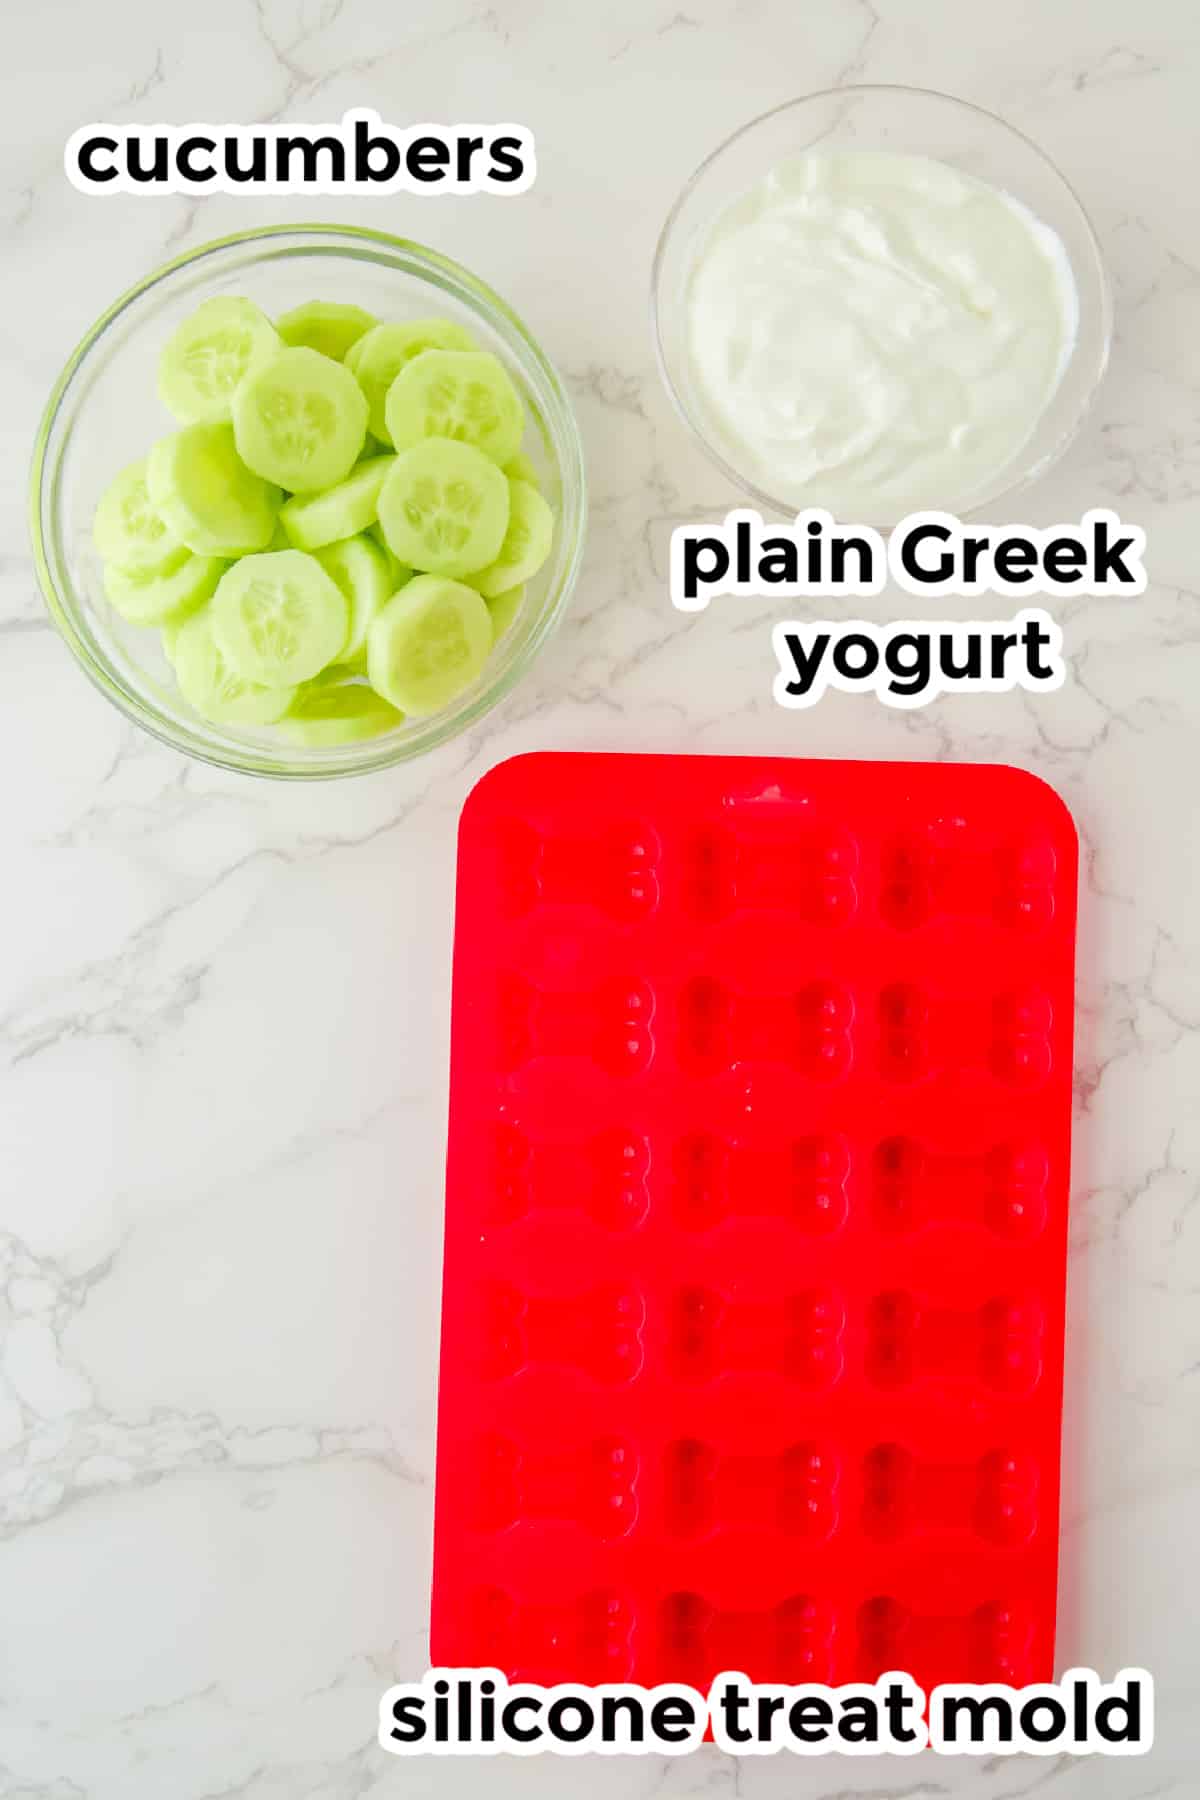 Ingredients and tools for making dog treats, including cucumbers, plain greek yogurt, and a silicone treat mold with text labels.